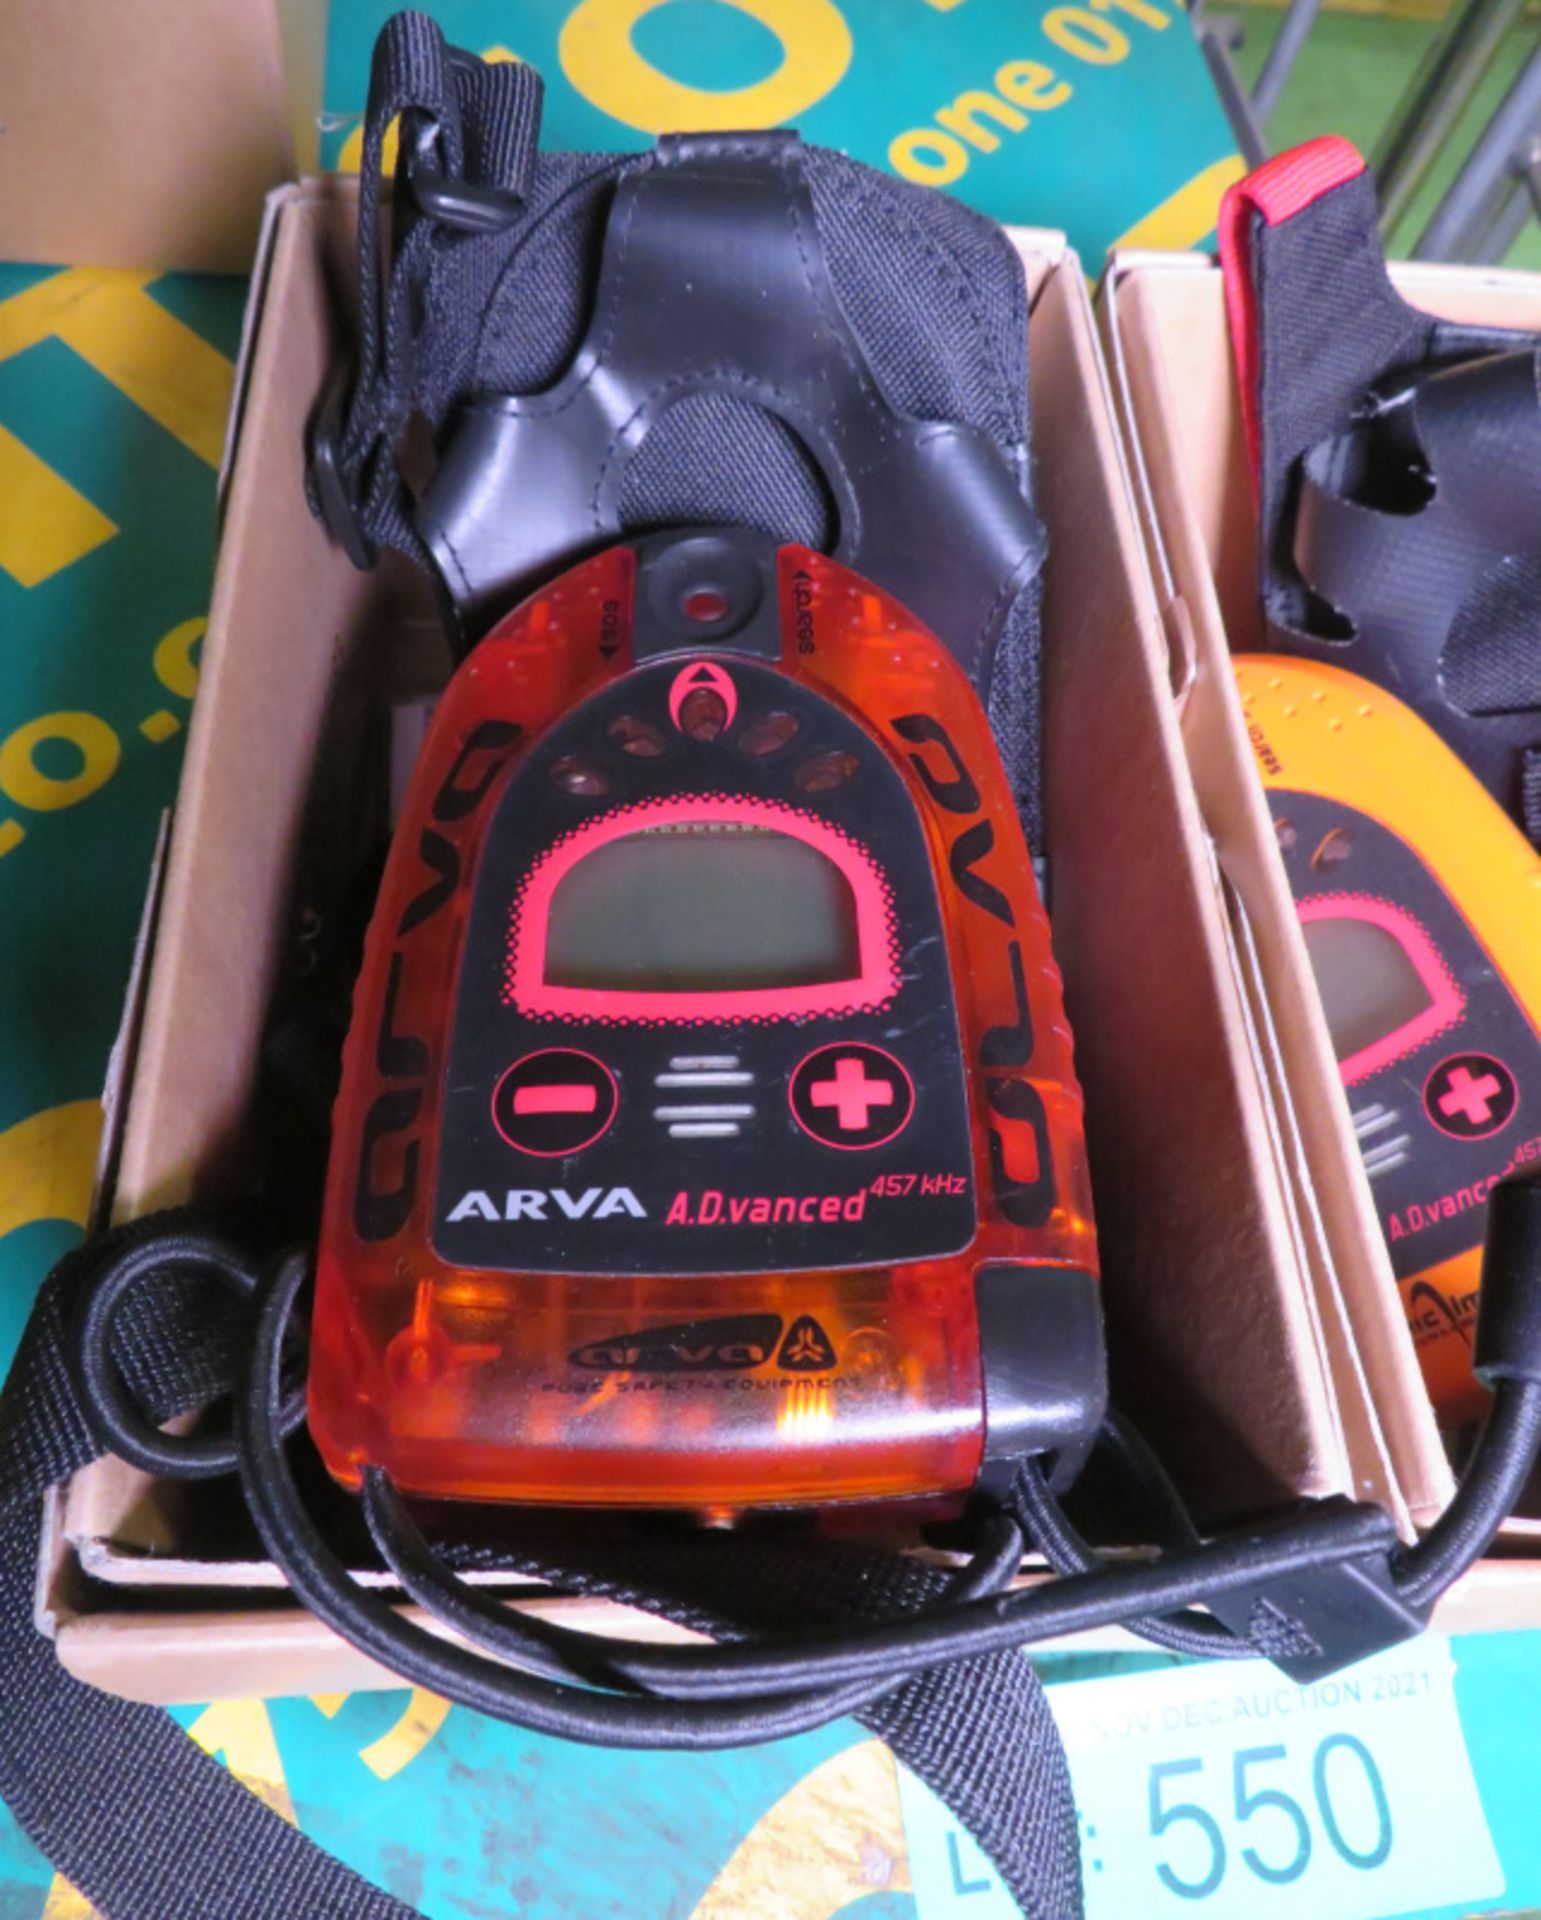 2x Arva A.D.vanced Avalanche Transceivers - 457kHz - Image 3 of 3